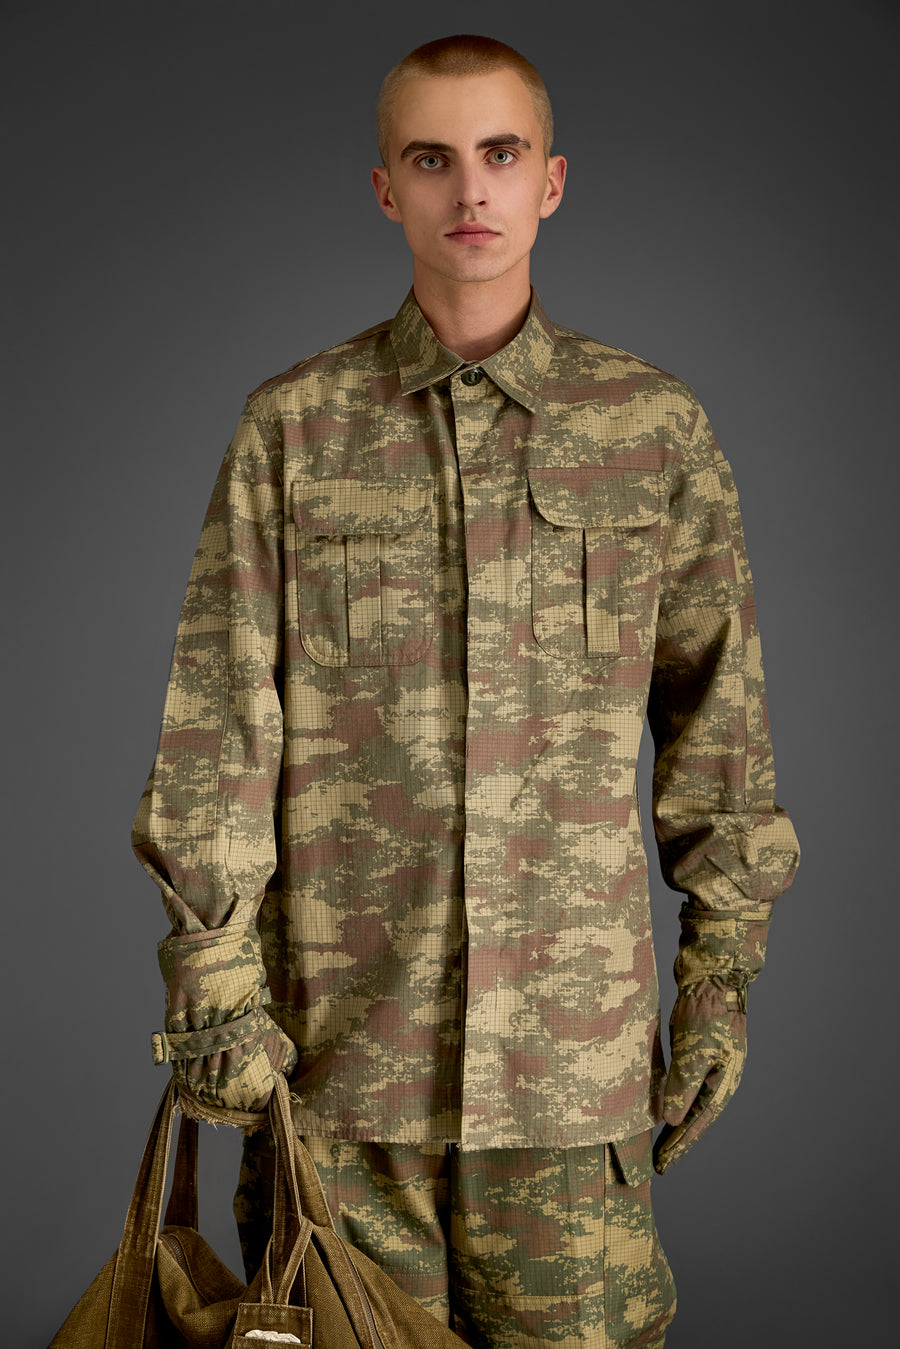 Designed for land forces with ripstop fabric